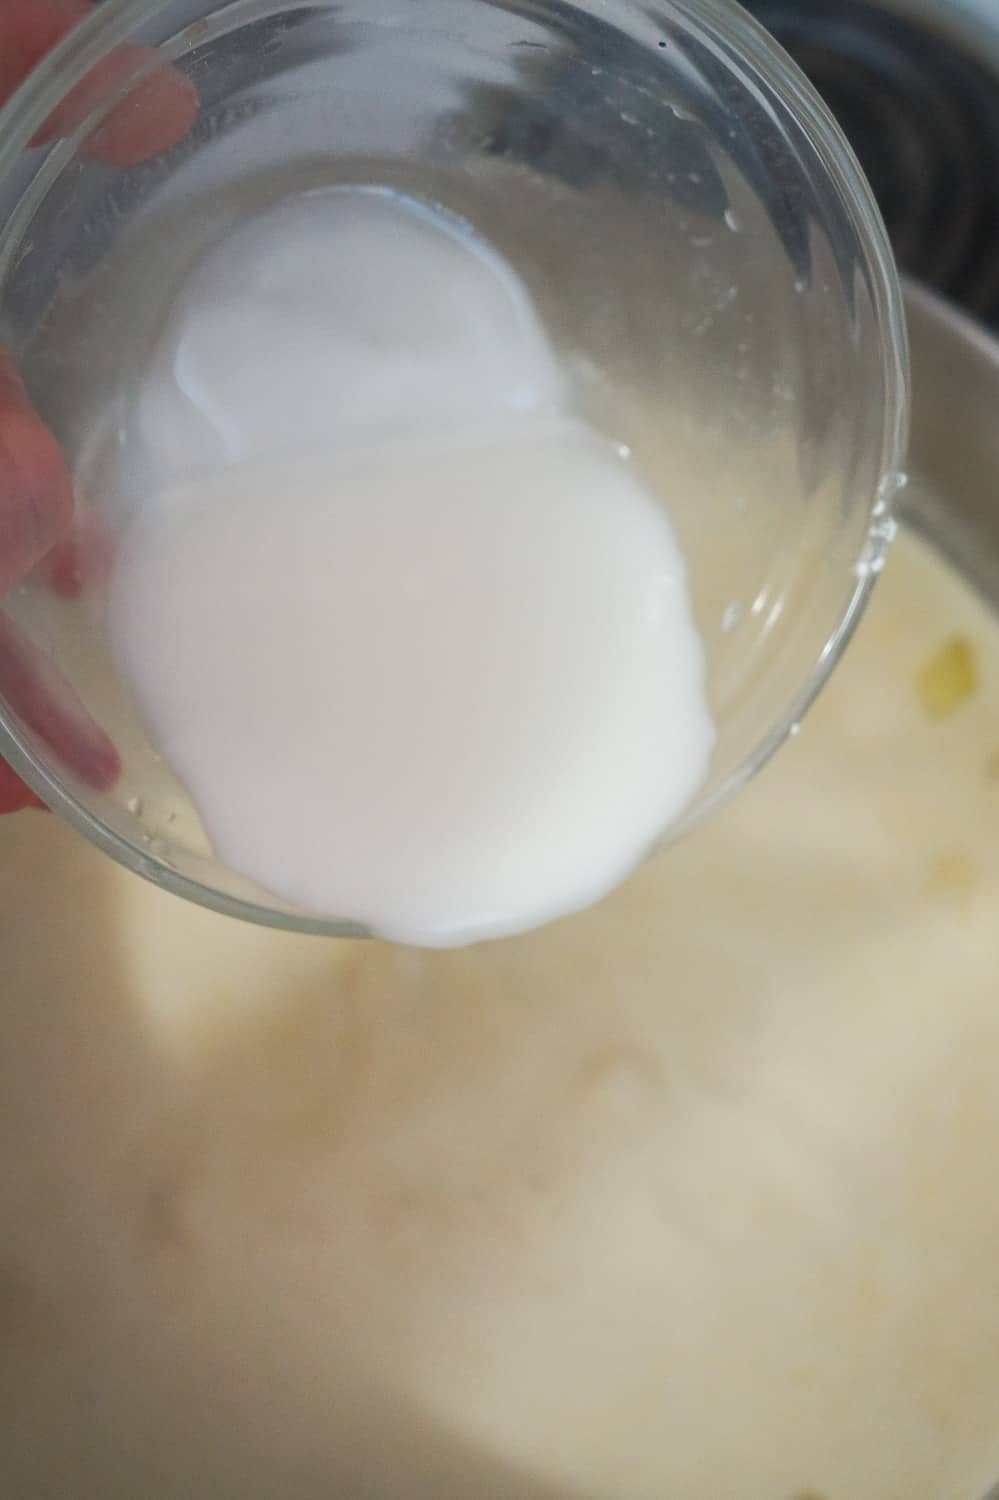 corn starch and water mixture being poured into soup